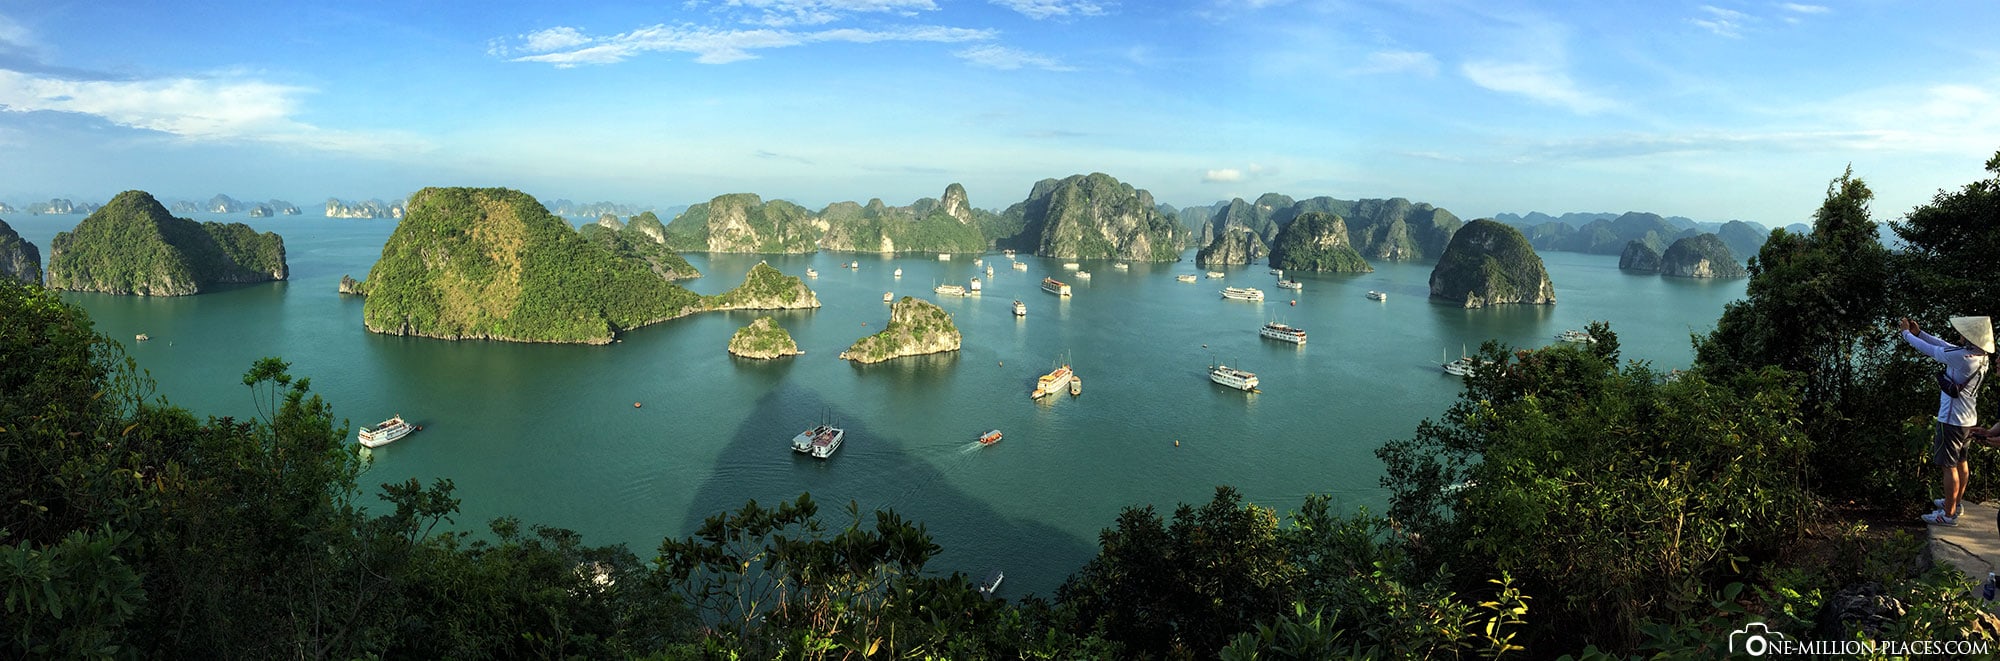 Panoramic view, Halong Bay, Vietnam, 2 day boat tour, cruise, ship, travel report